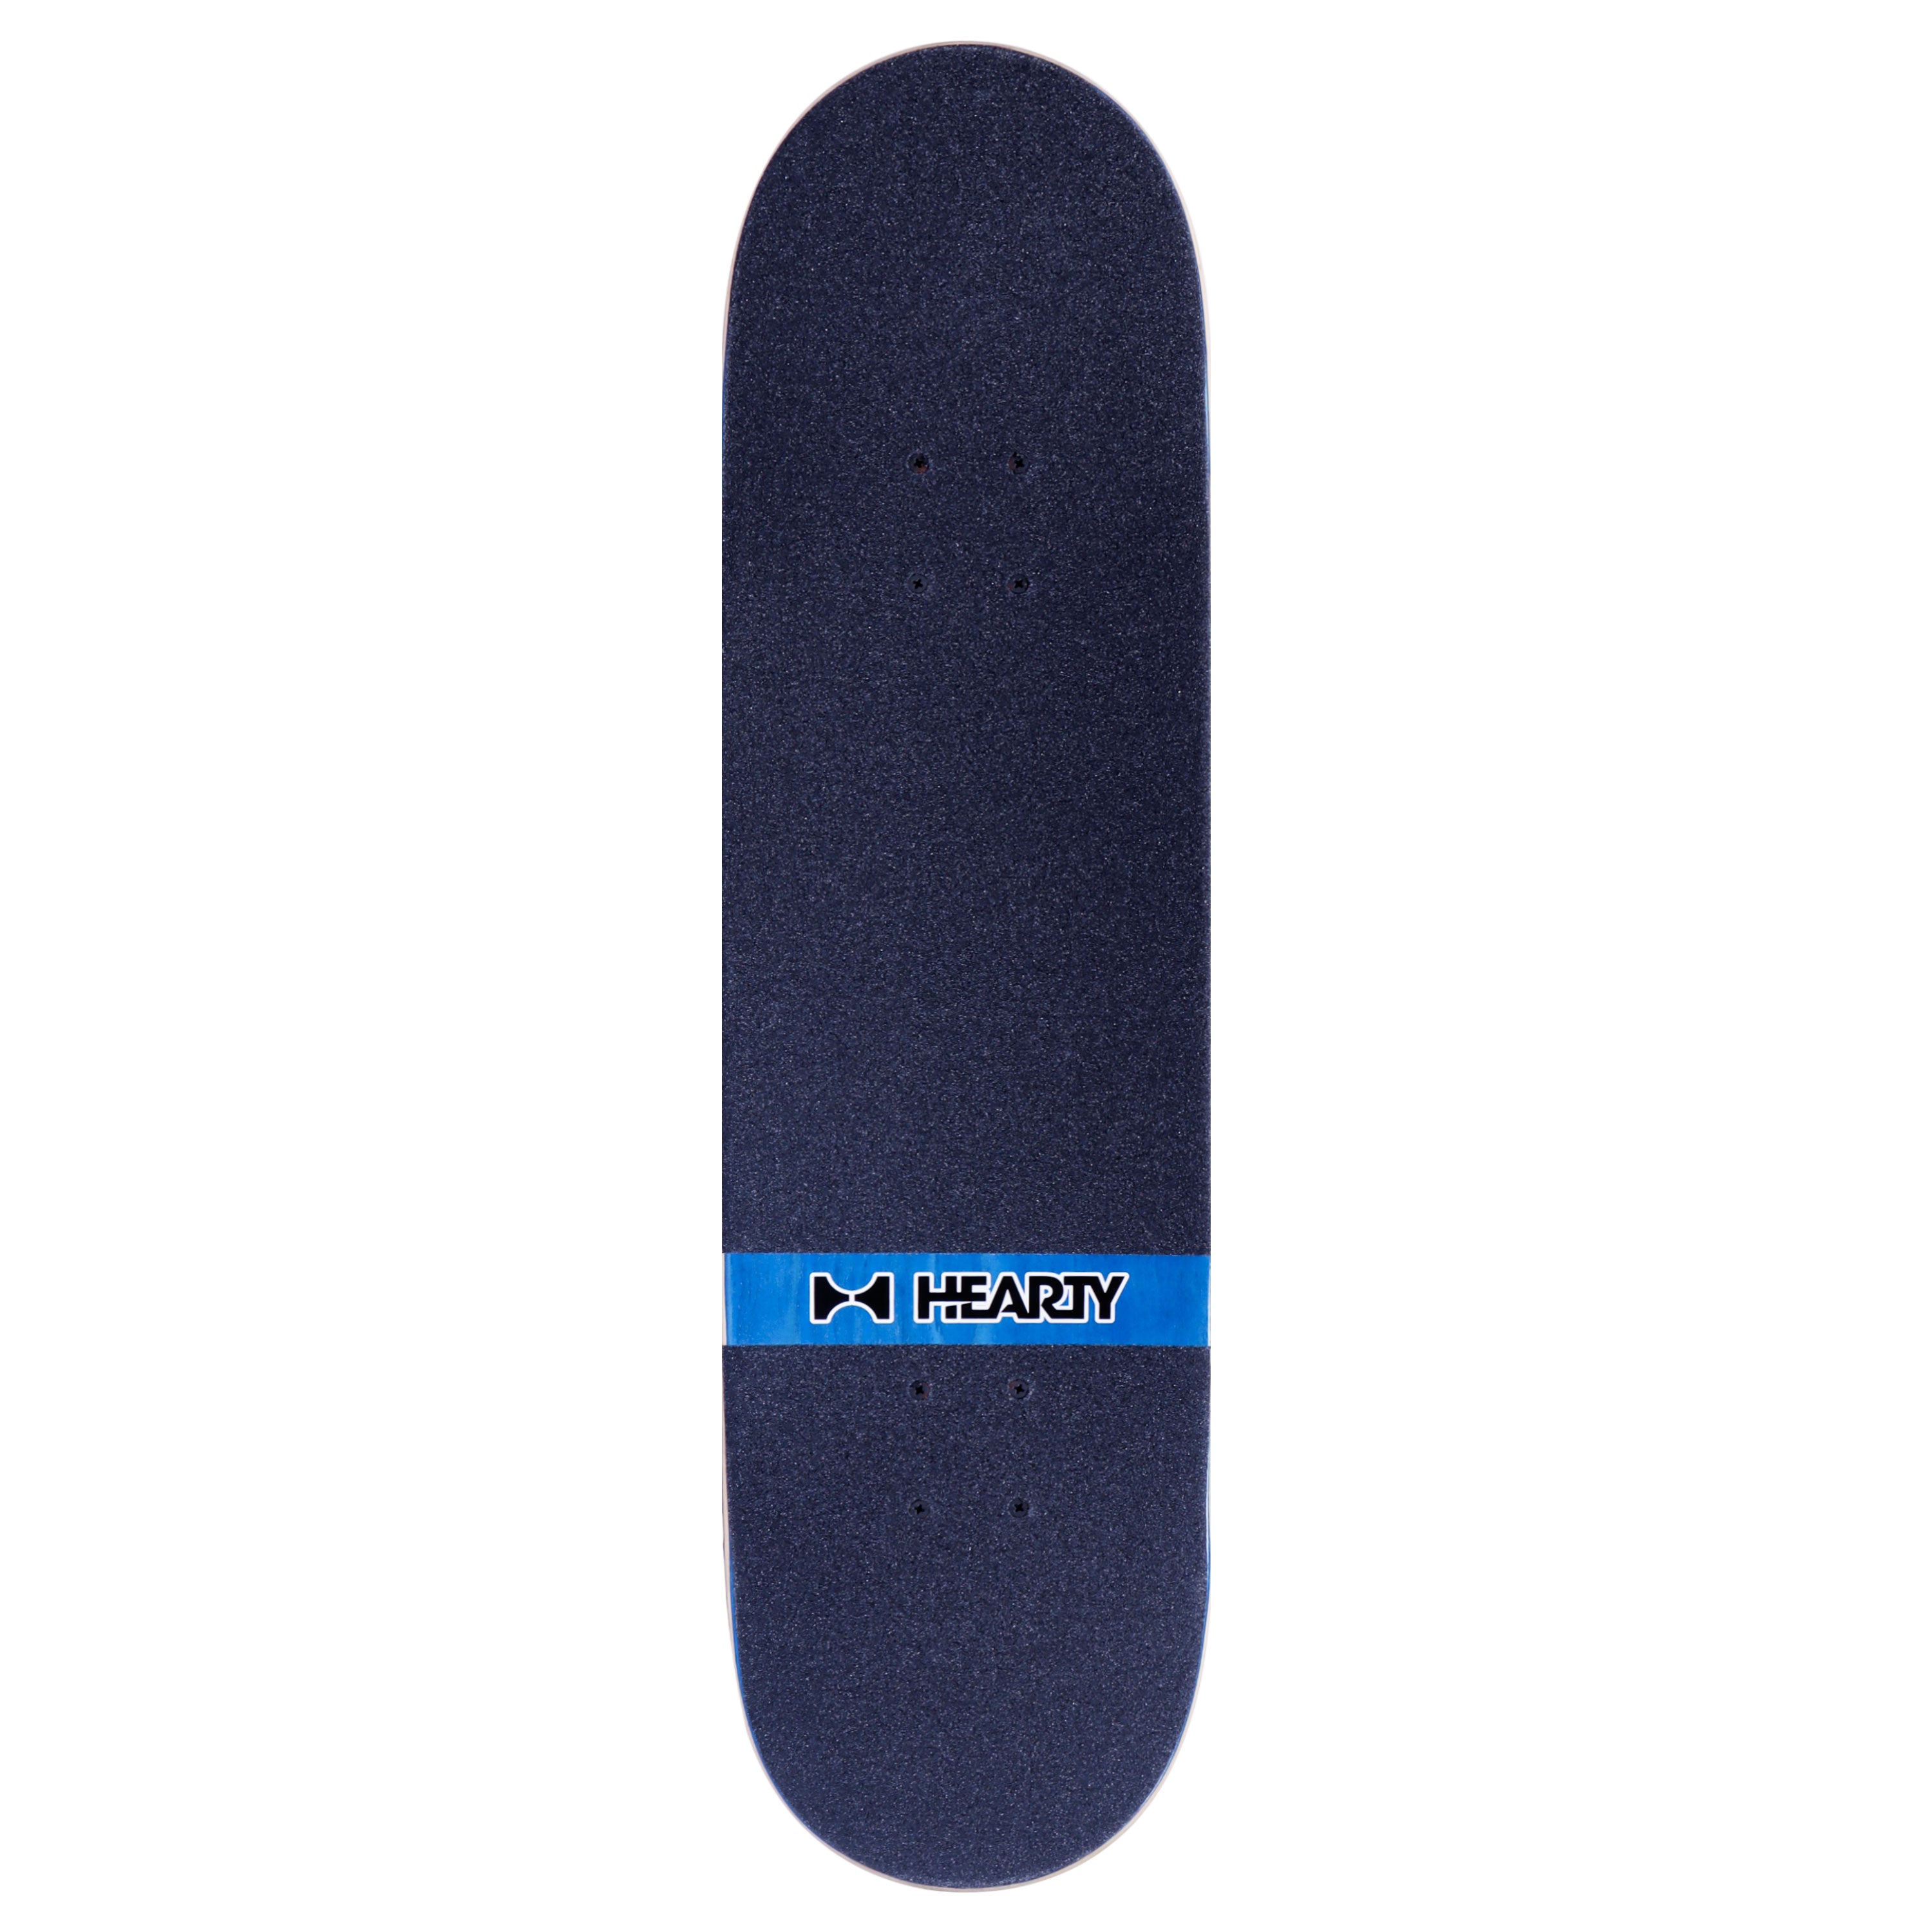 Hearty Skateboards Floral Cream 7.375" To 8.25"